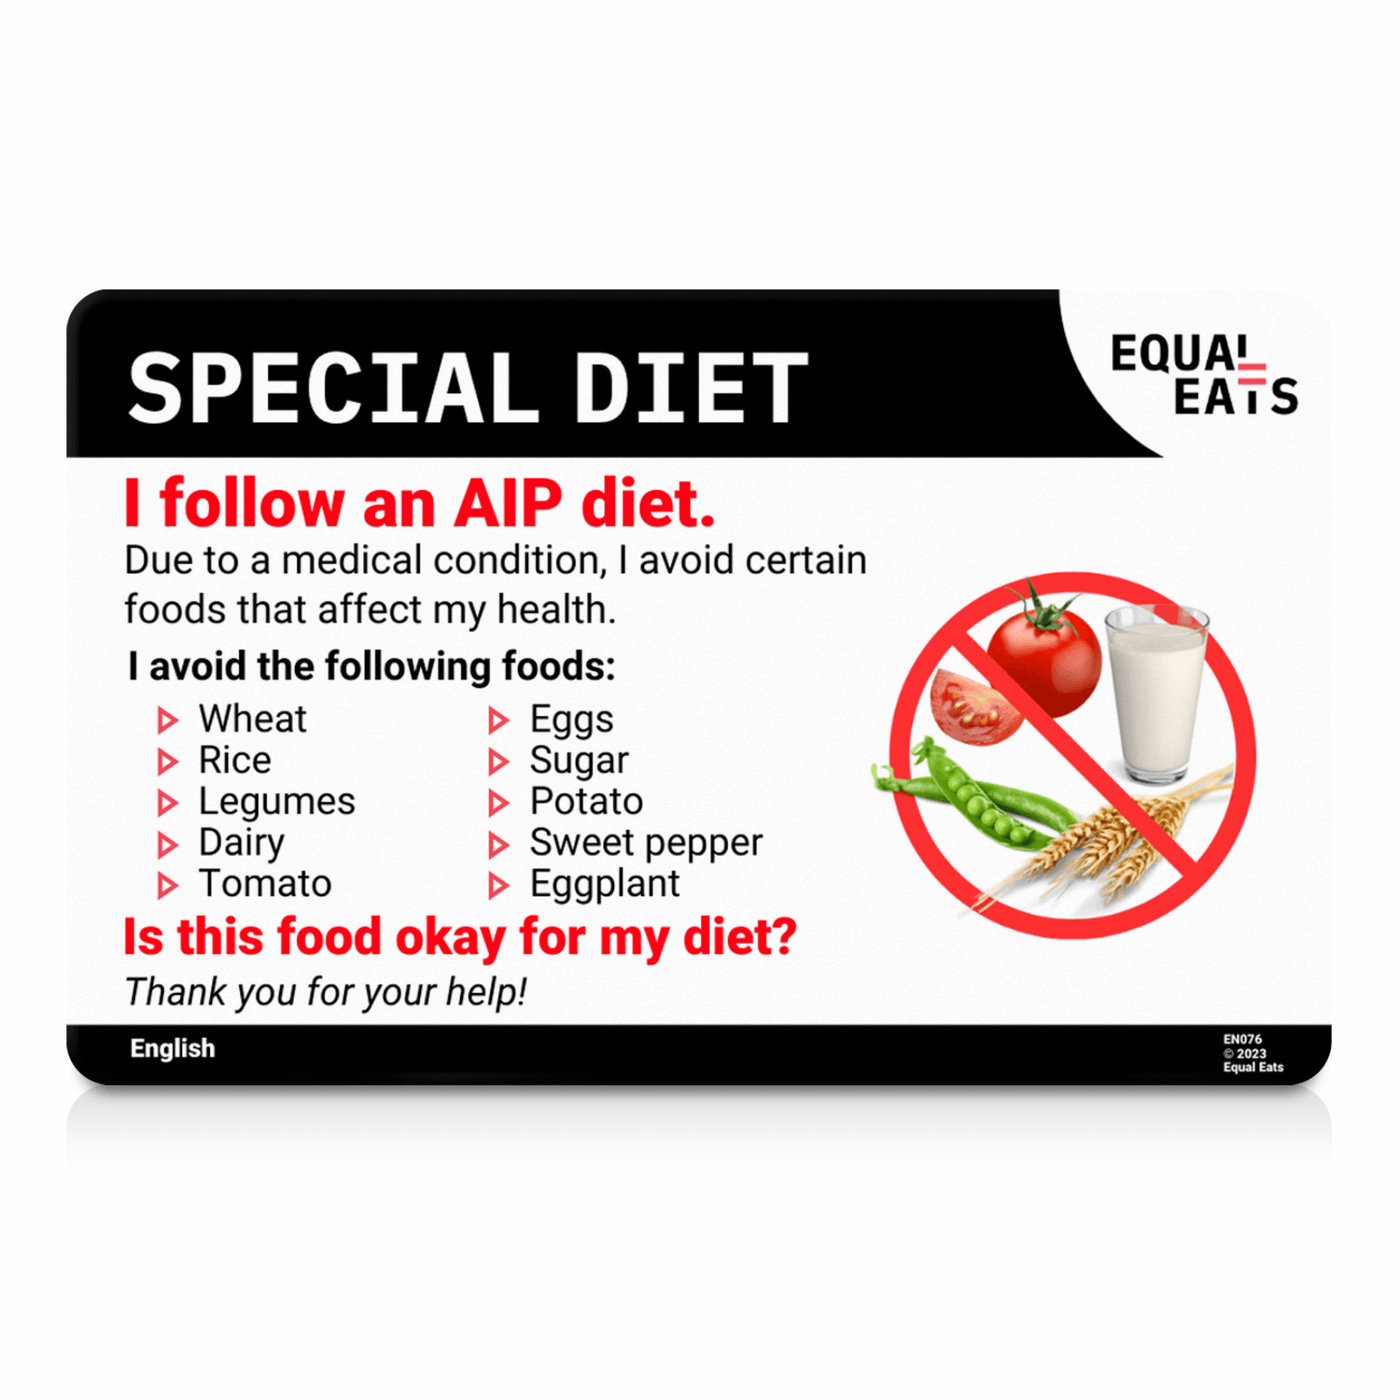 AIP Diet List Card by Equal Eats